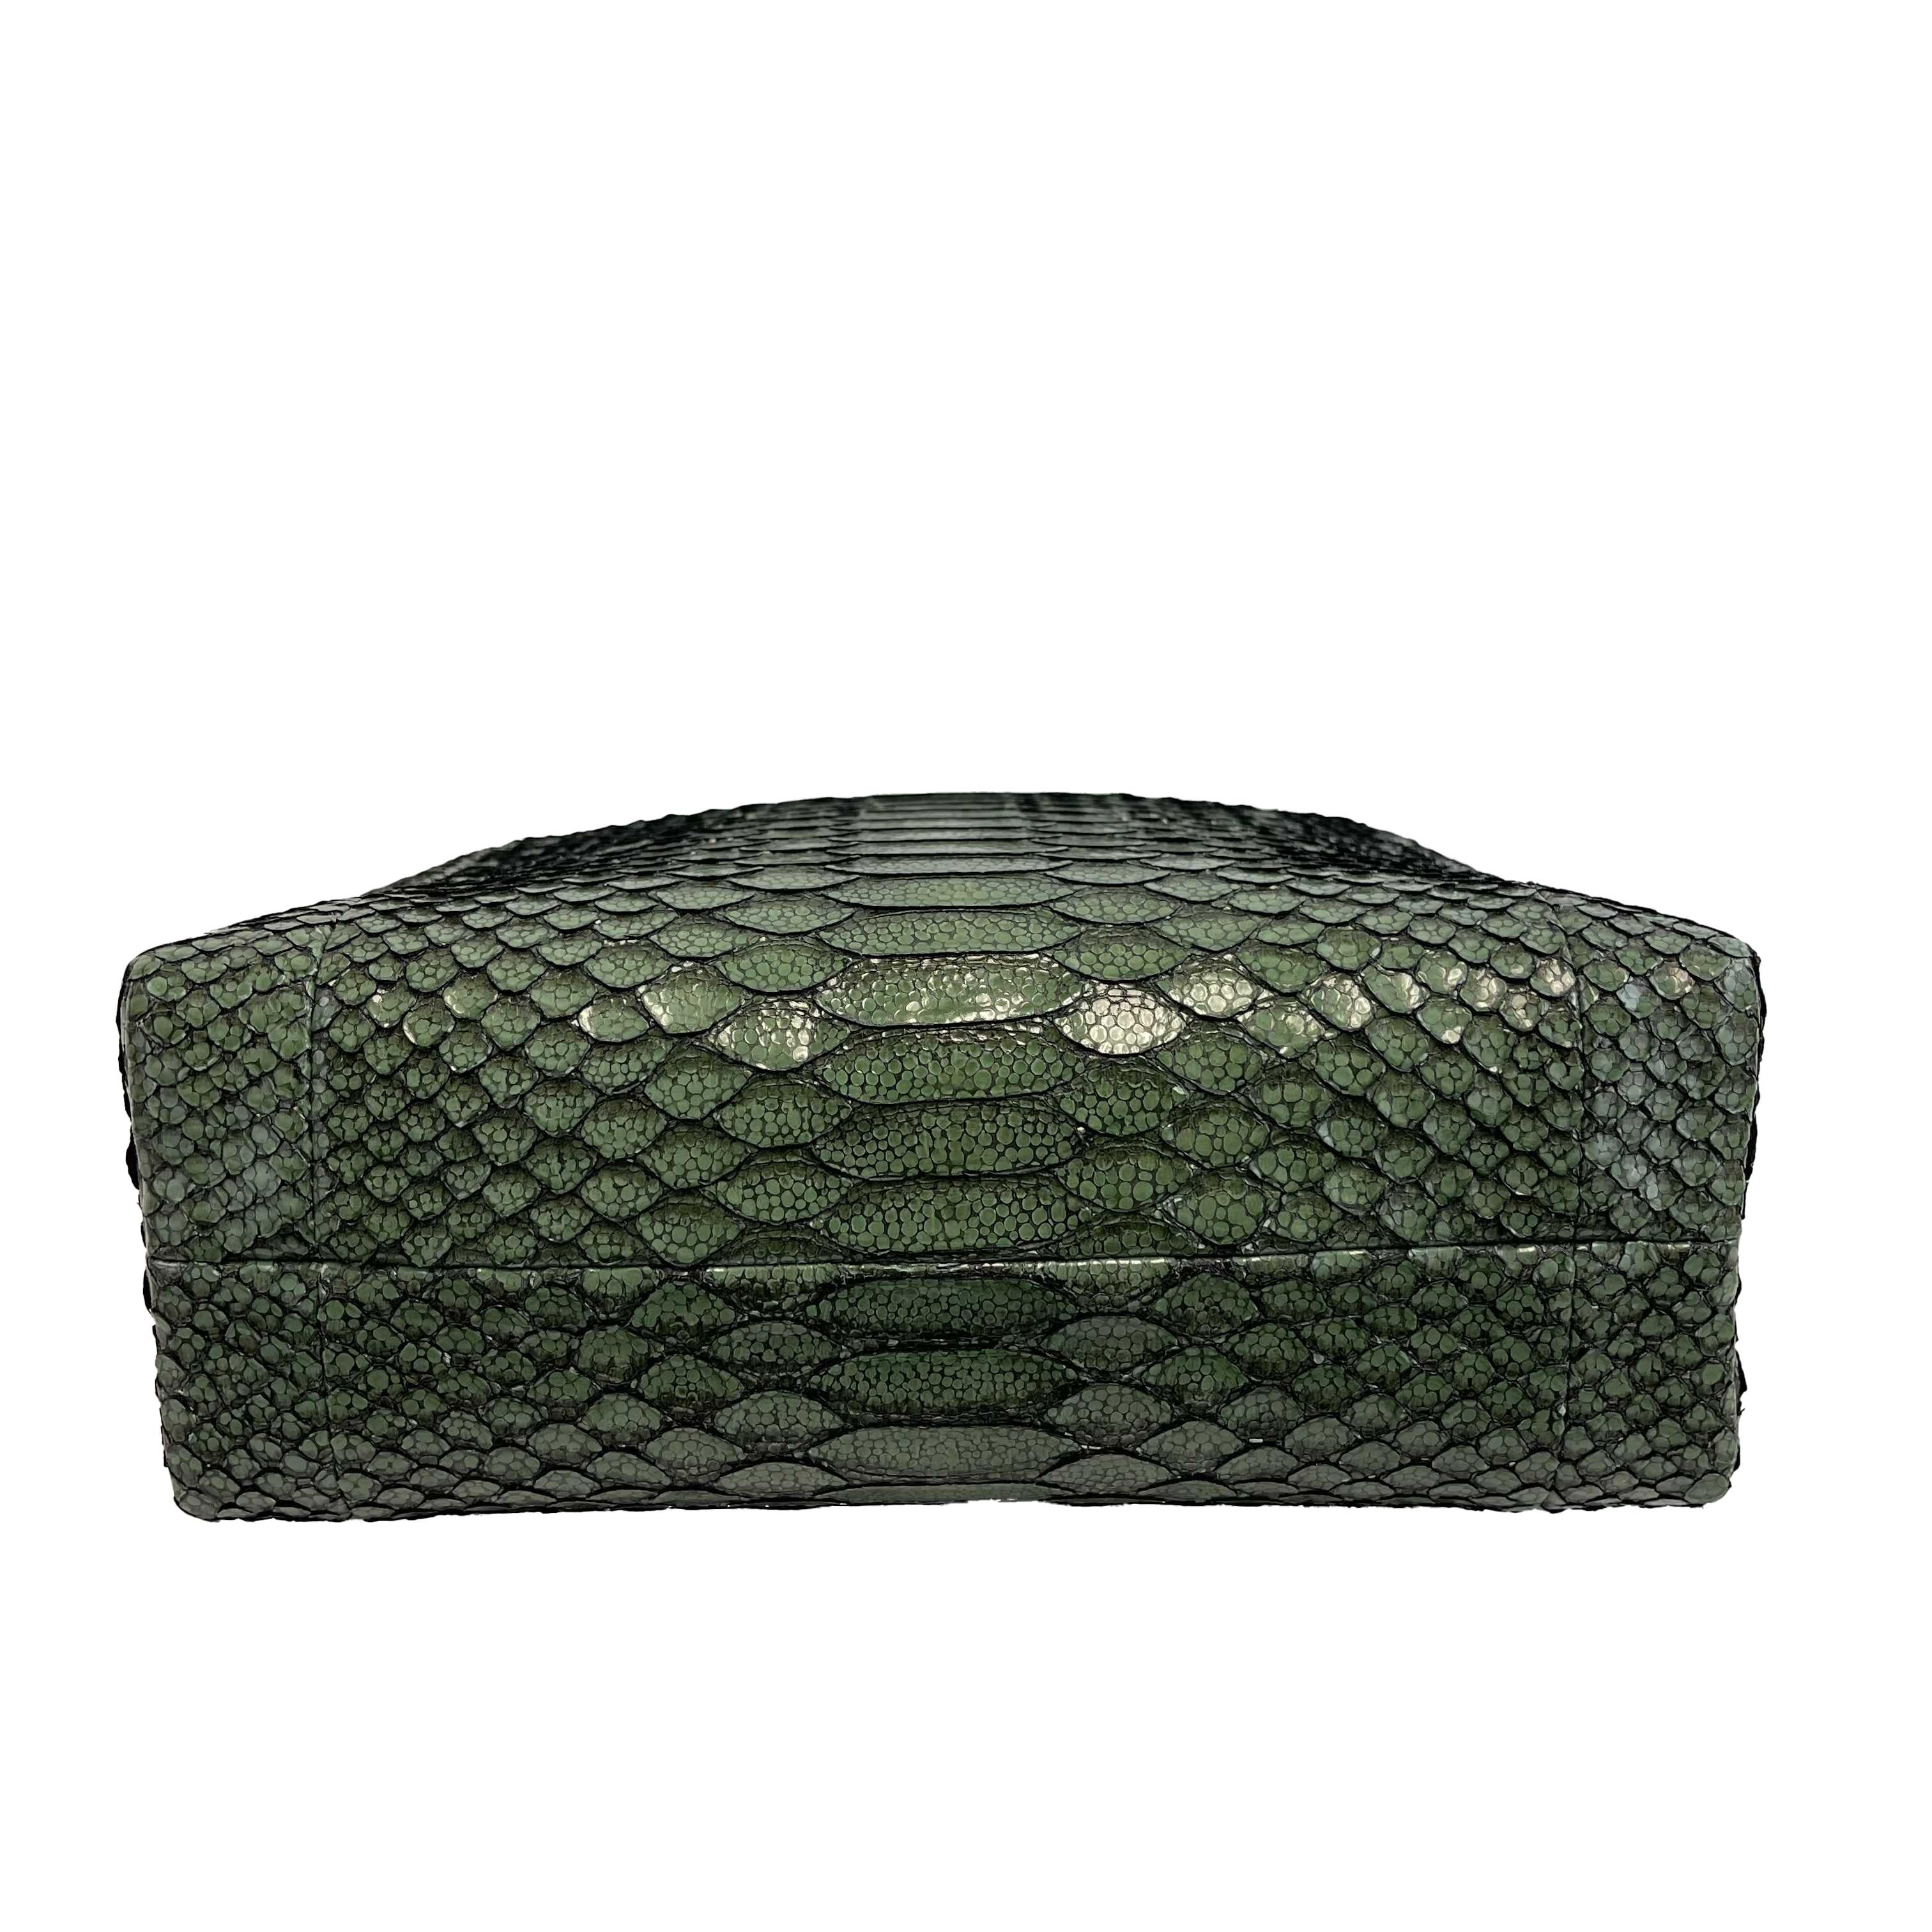 CHANEL - Python Snakeskin Green CC Kiss lock Shoulder Bag / Crossbody

Width: 8.25 in / 20.955 cm
Height: 7.25 in / 18.415 cm
Depth: 3 in / 7.62 cm
Strap Drop: 19.75 in / 50.165 cm
Details

Made In: Italy
Color: Green
Material: